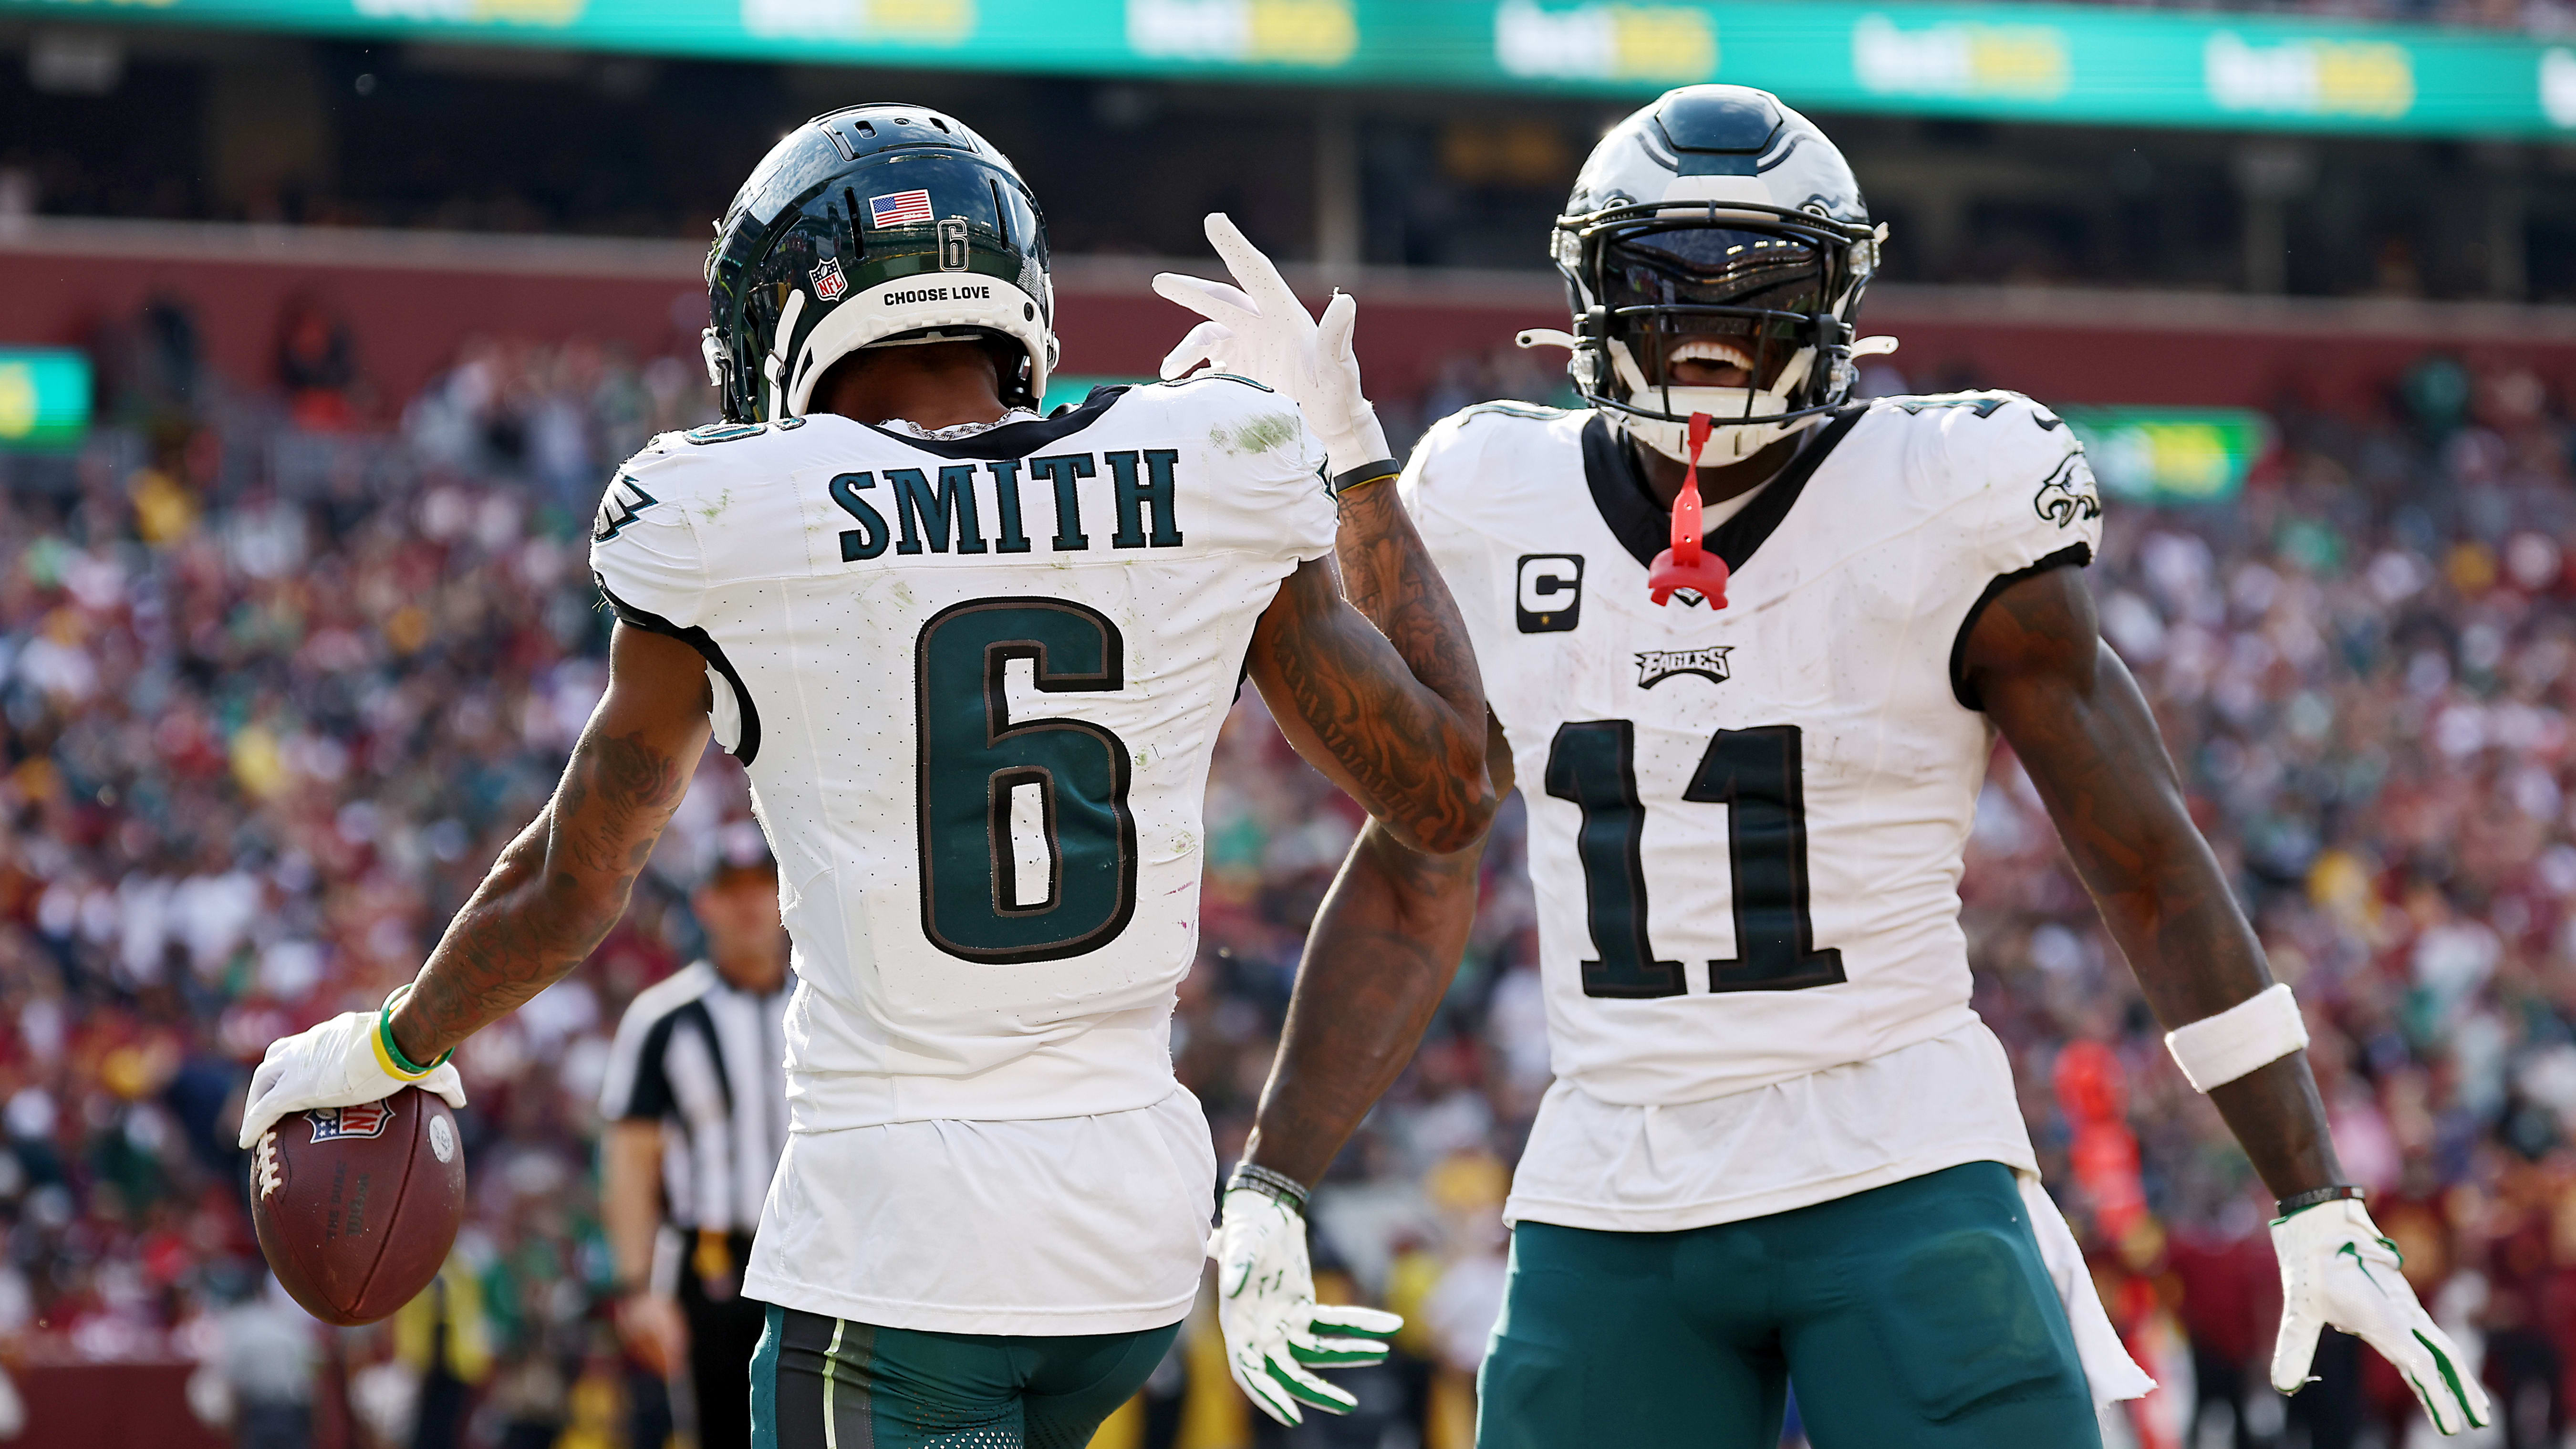 Eagles wide receivers DeVonta Smith and A.J. Brown